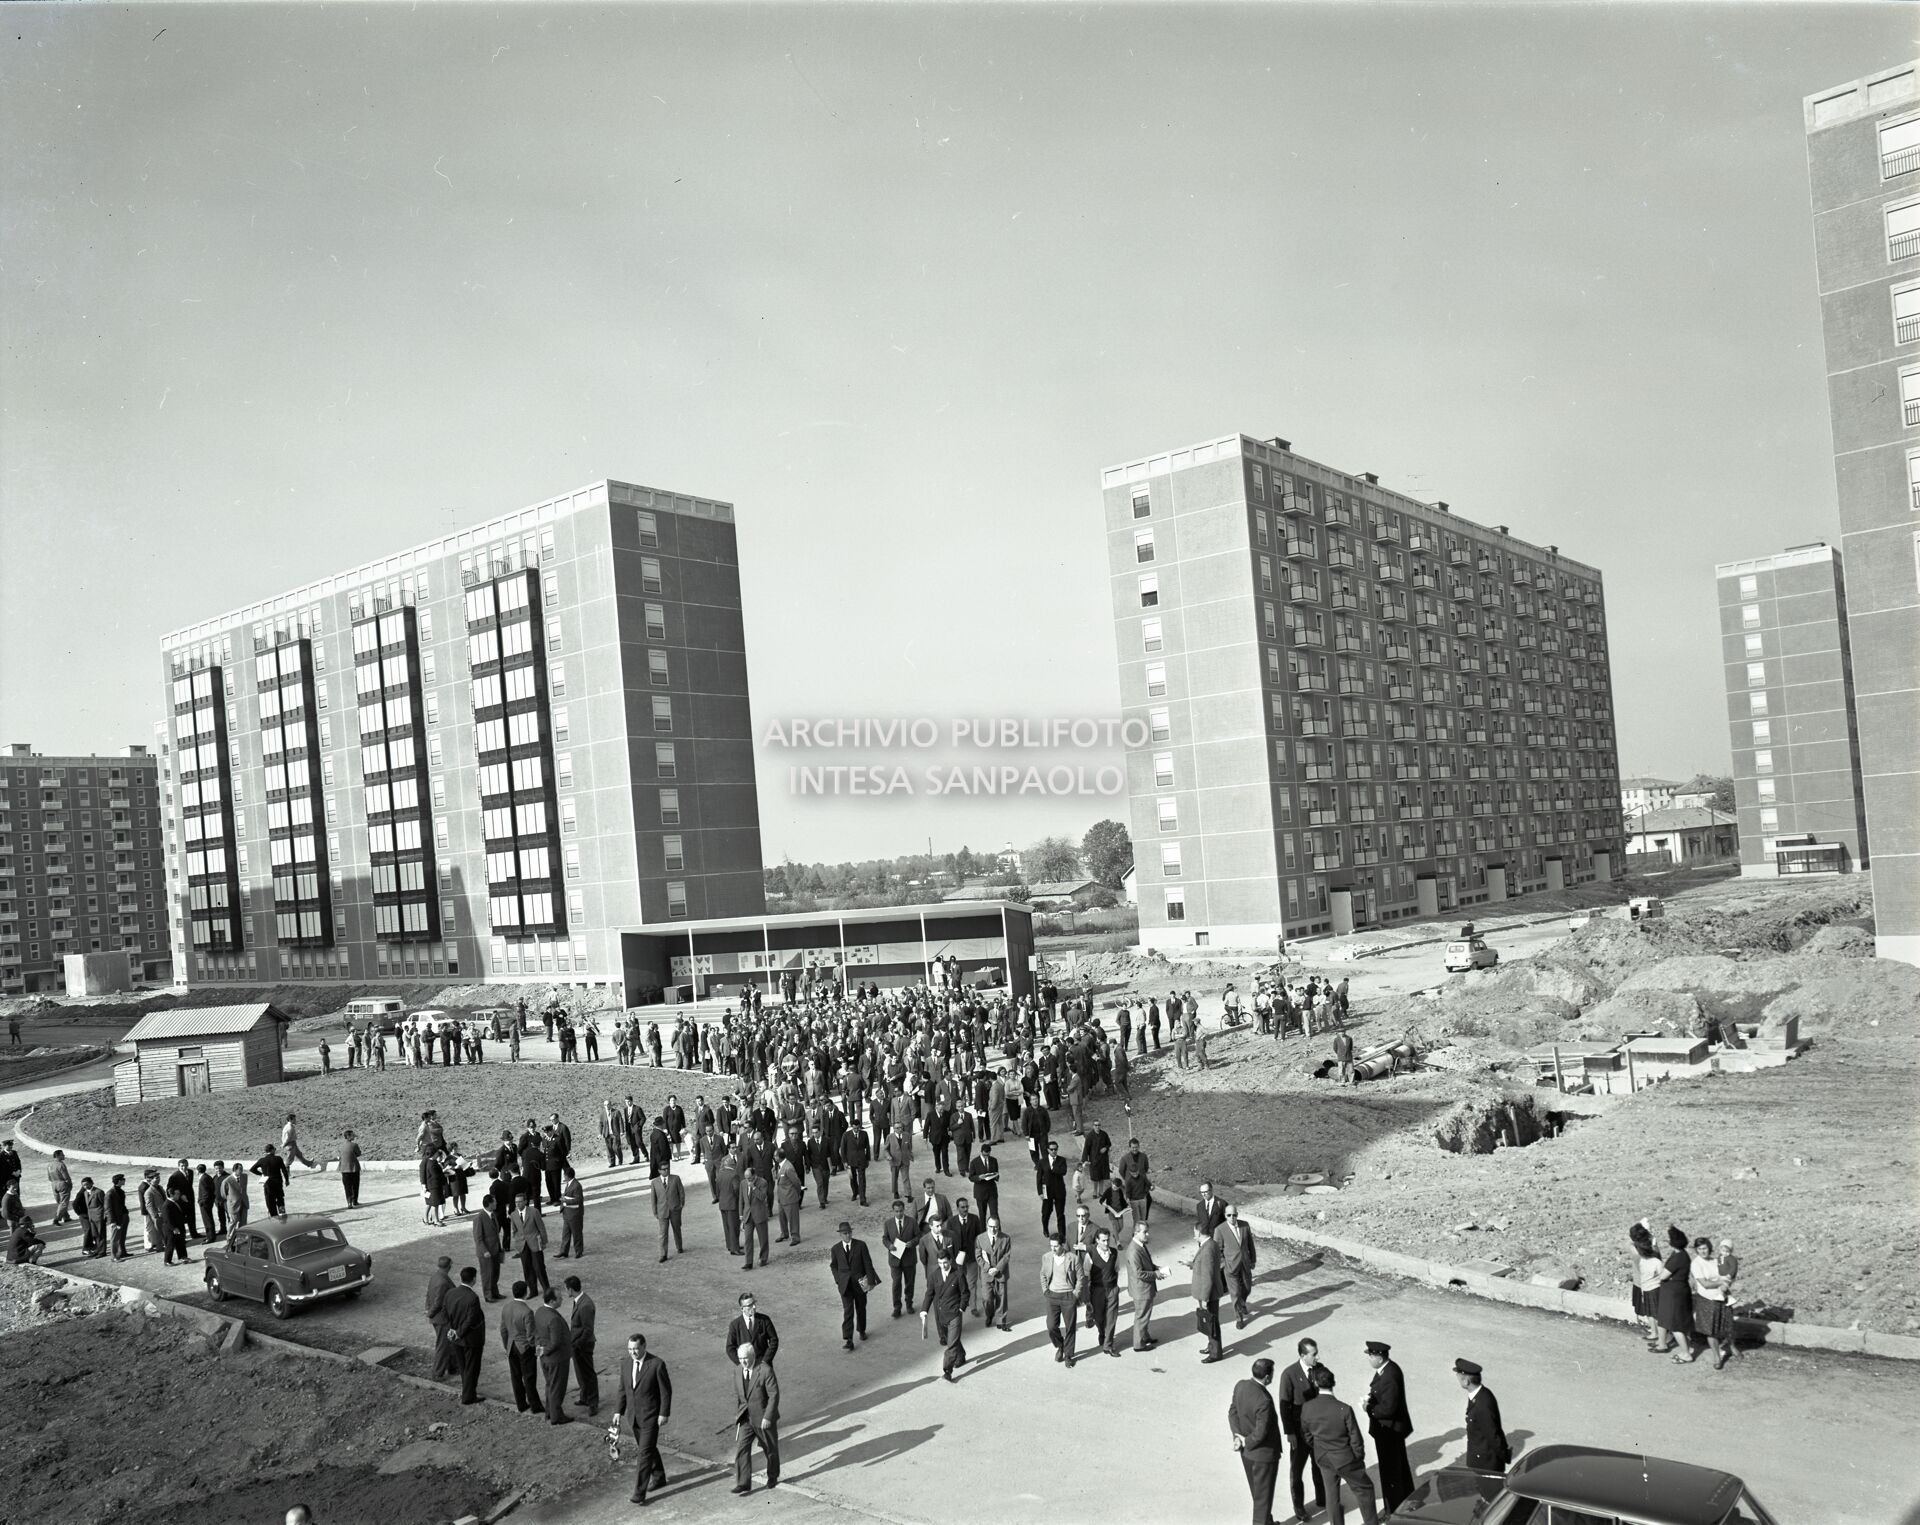 Inauguration of the first of five prefab districts in Gratosoglio in Milan: the first buildings of this type built in Italy